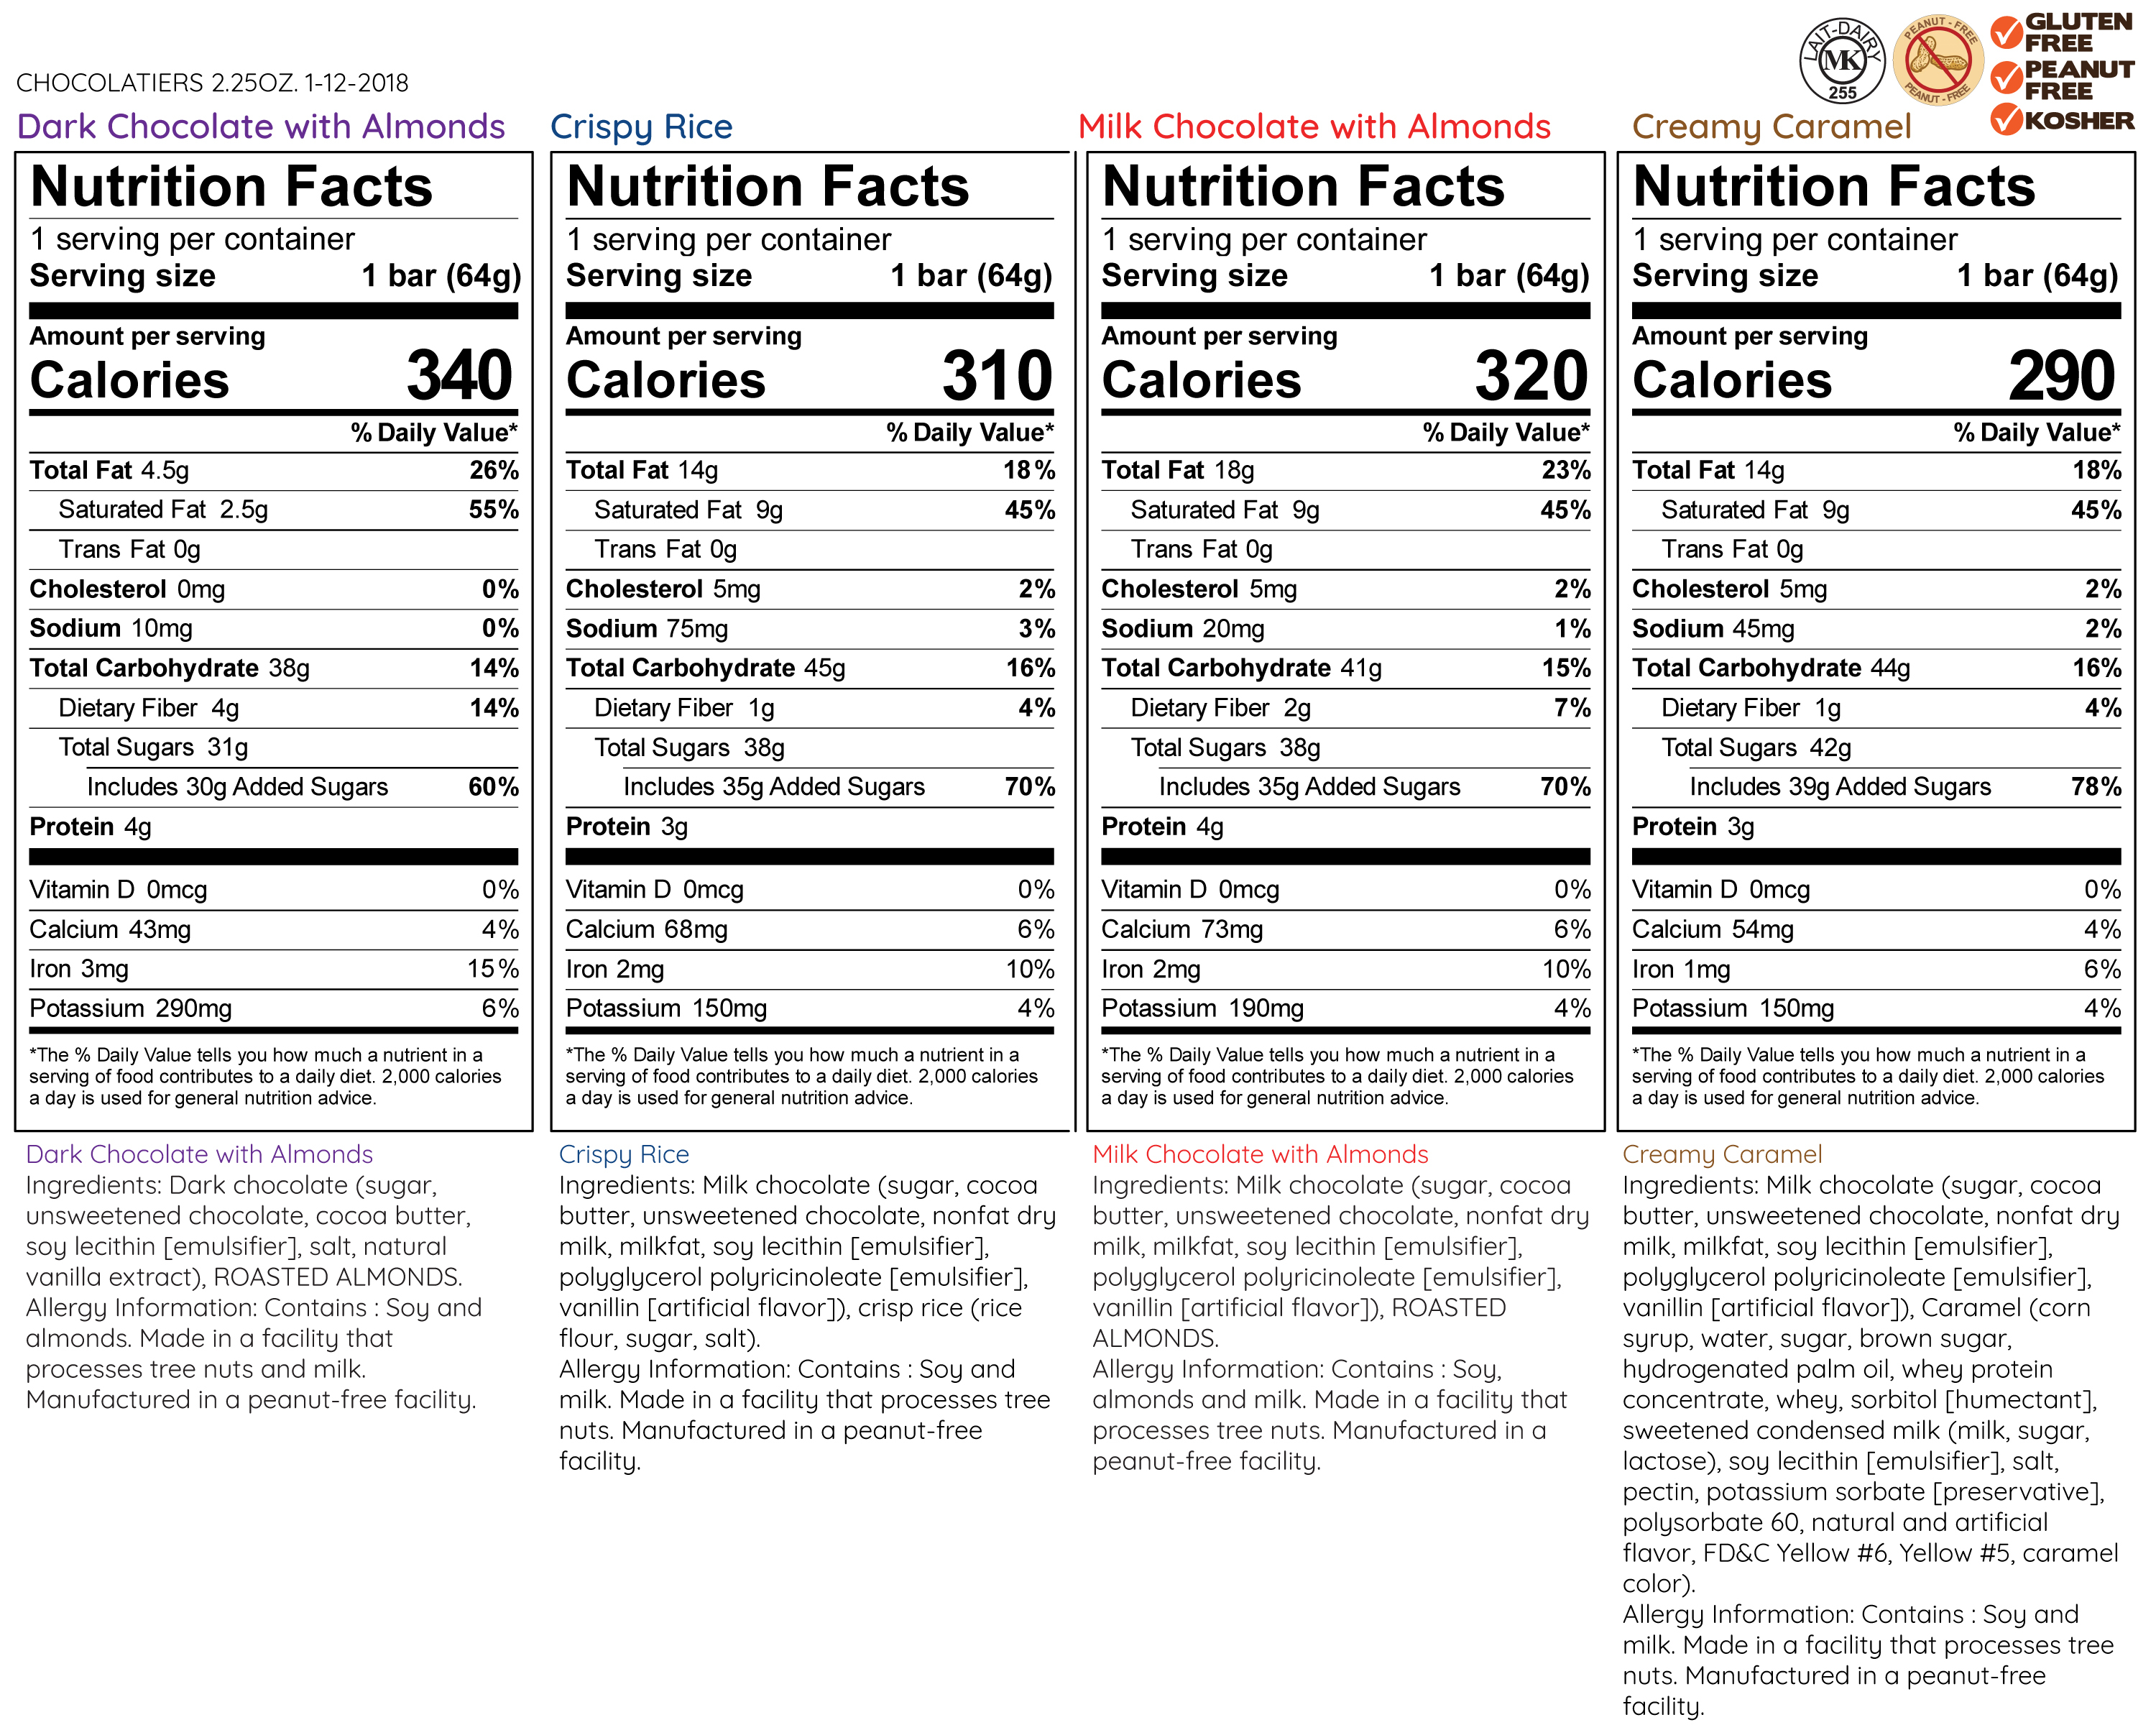 Chocolatiers 2.25 oz Nutrition Facts and Ingredients